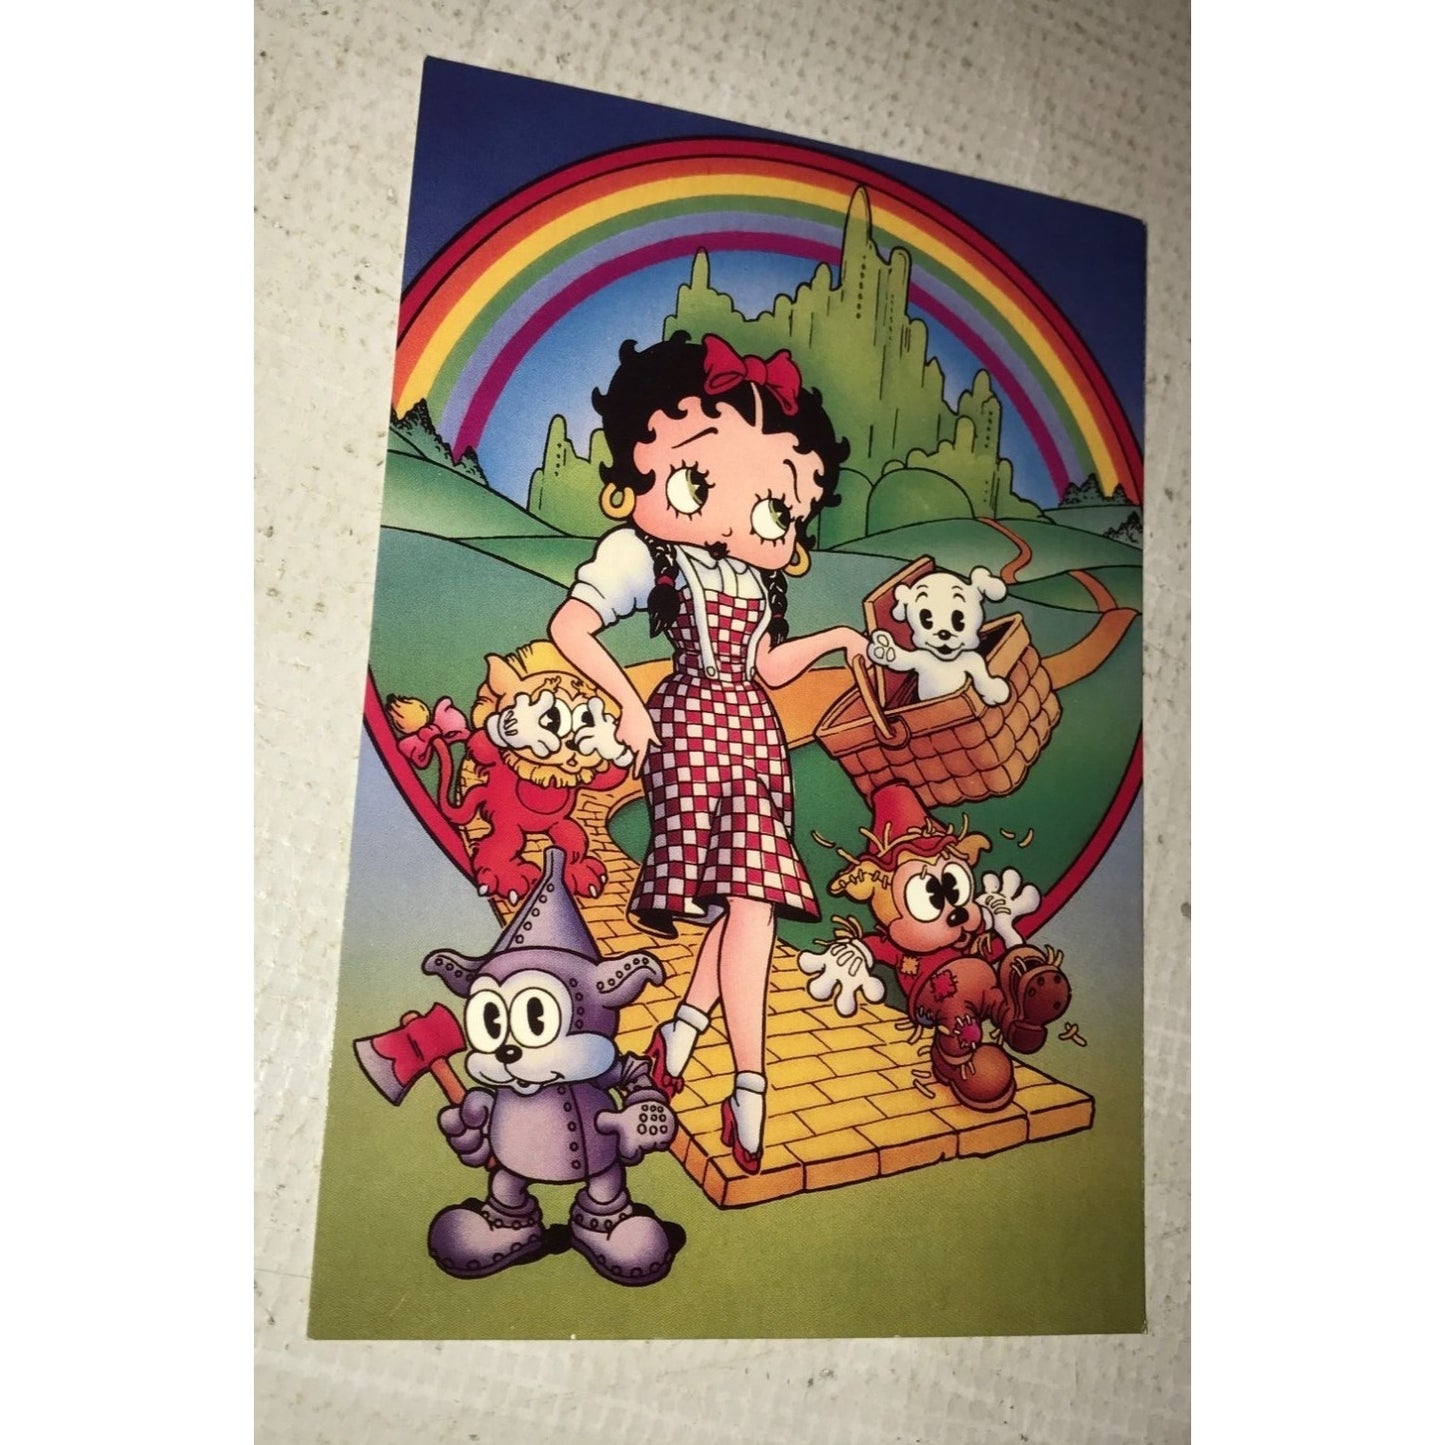 Betty Boop- Boop in the Land of Oz Vintage Postcard- about 6 by 4 inches